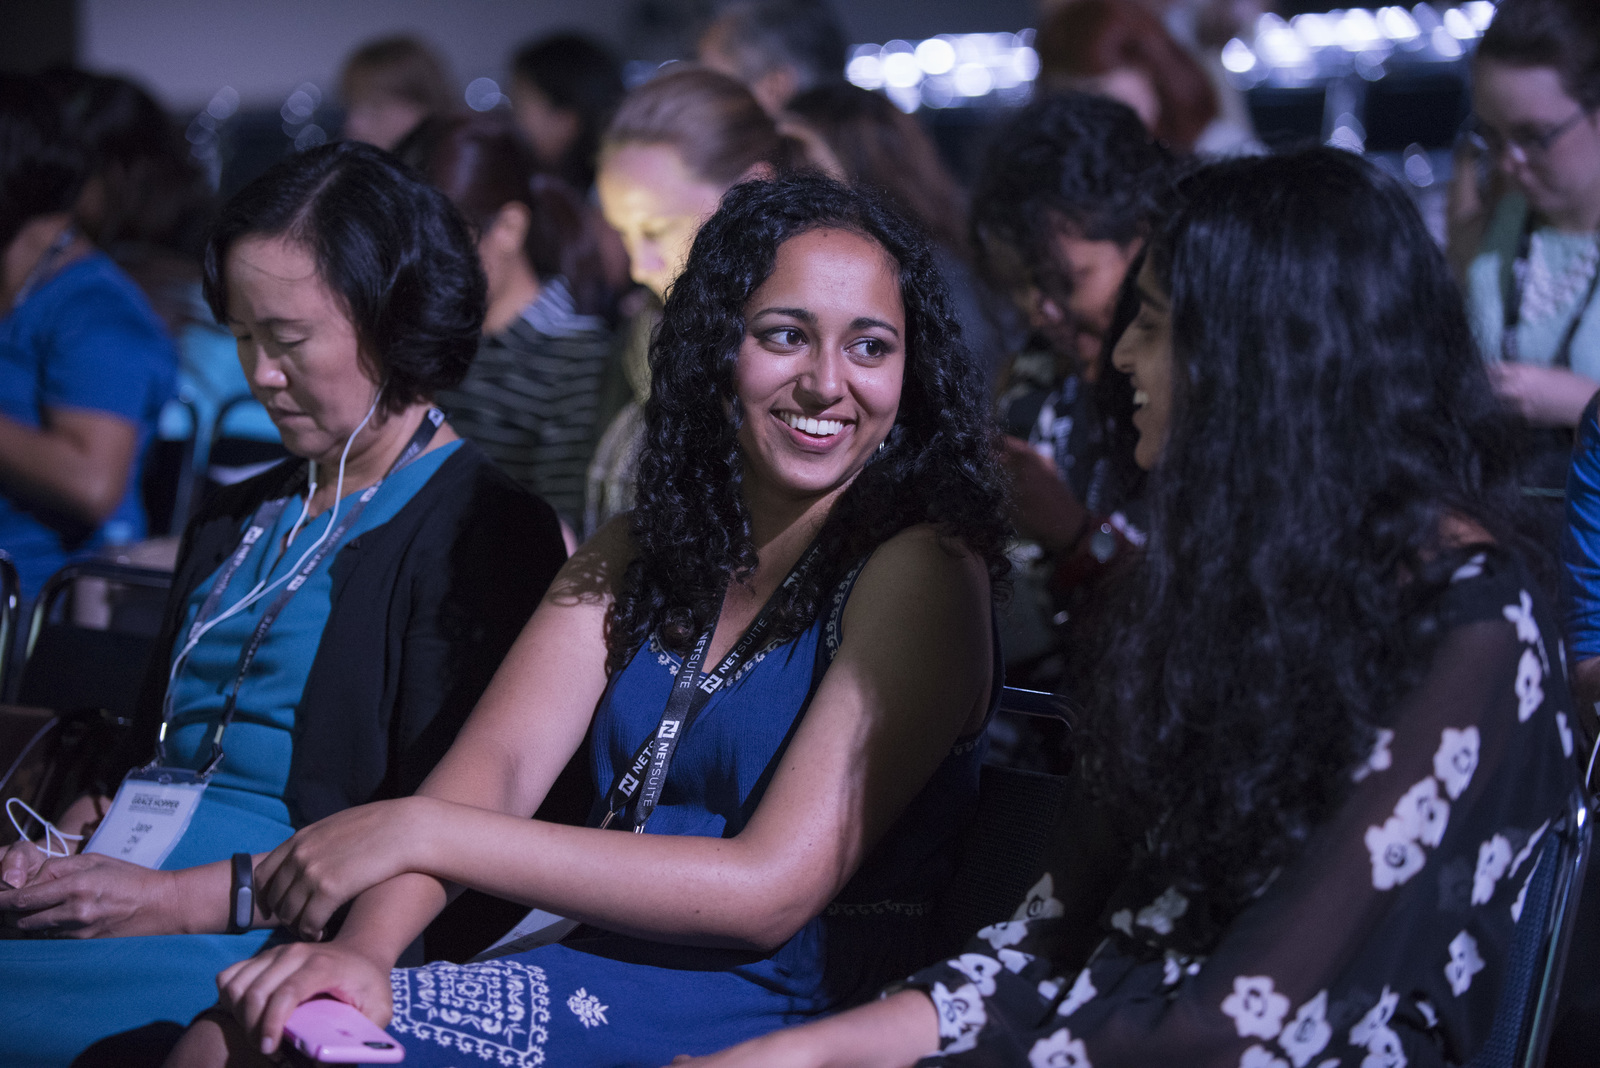 GHC Named a Leading Conference for Women in Tech